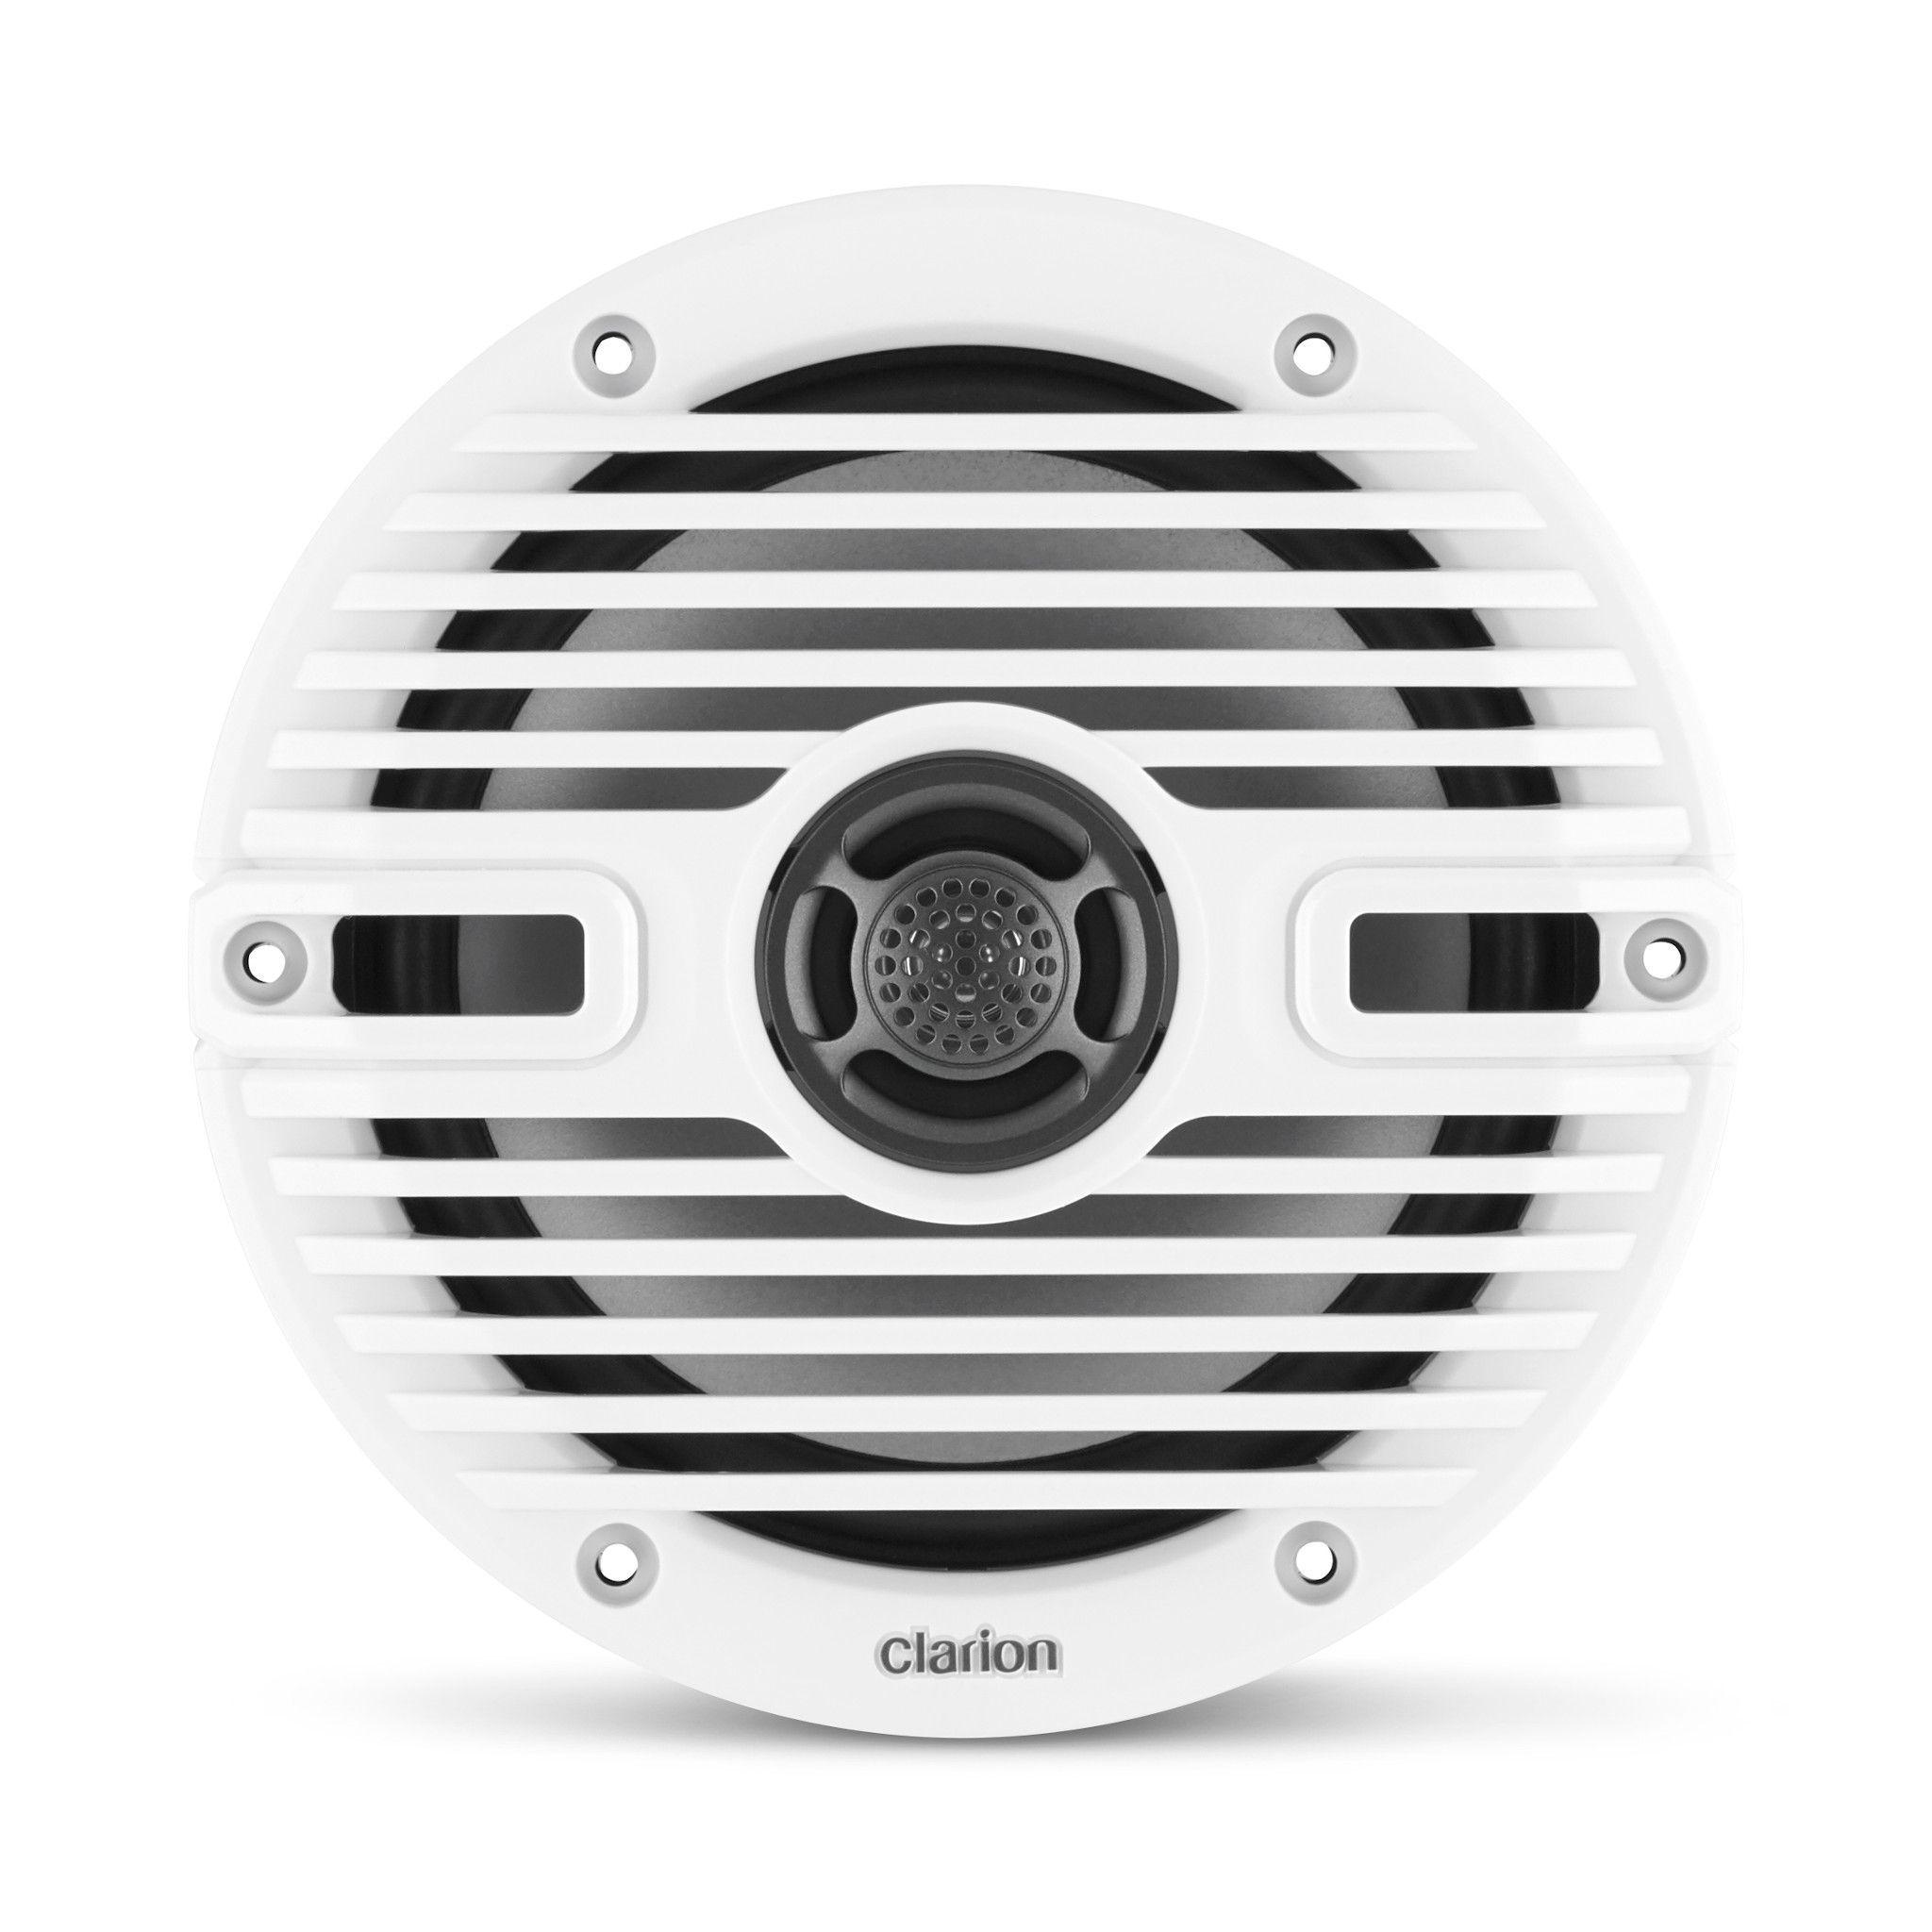 CLARION 6.5-inch Coaxial Marine Speakers, 30W RMS power handling, 1/2-inch (13 mm) polymer dome tweeter *Includes White & Black Classic Grilles | 92609